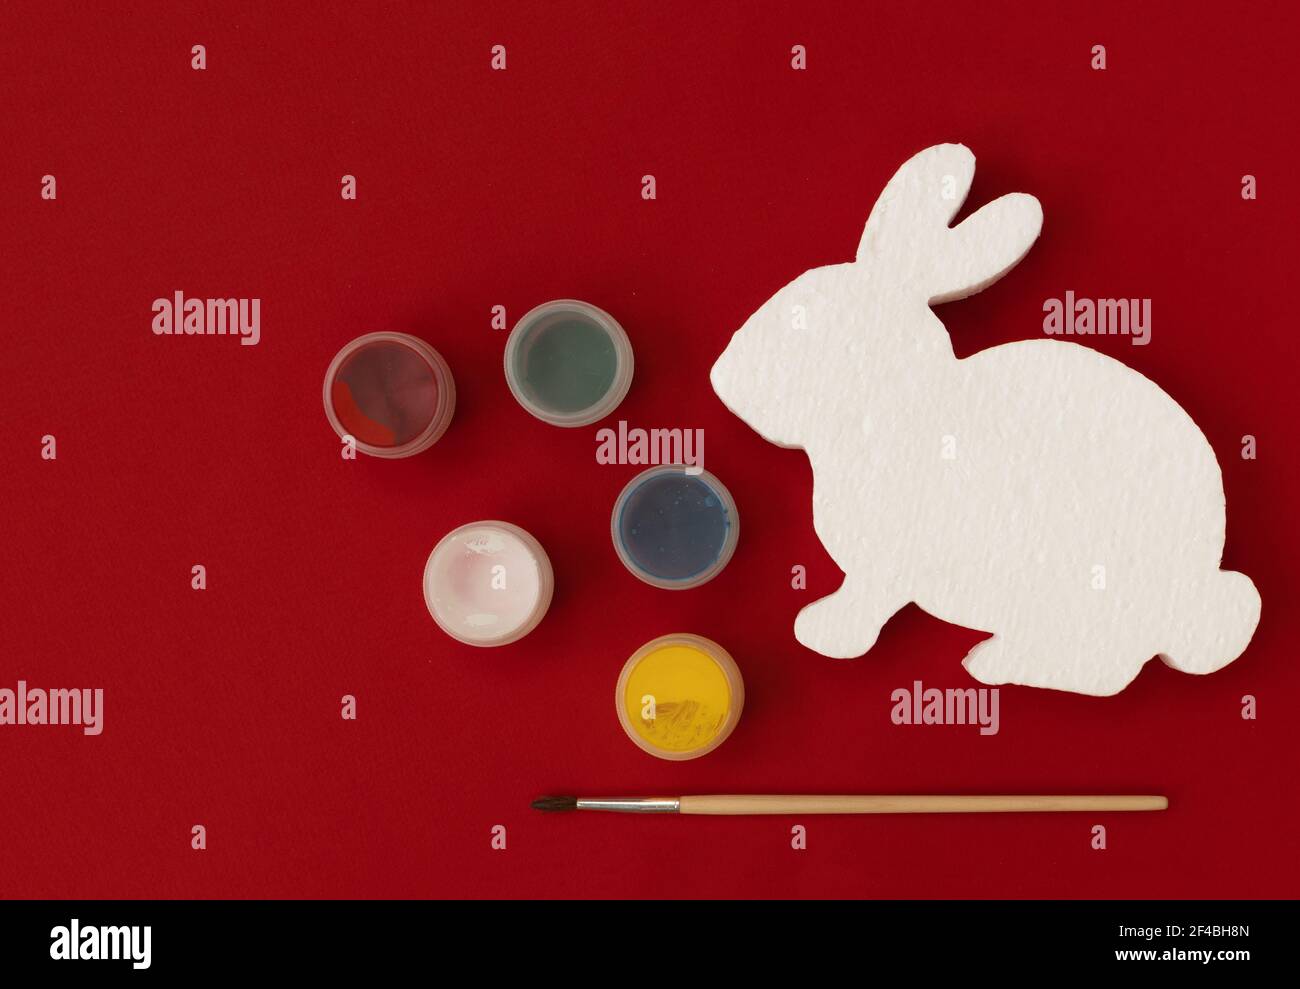 White figure of bunny or rabbit for decorating, paints and brushe on red background. Easter diy with children. Top view with copy space. Stock Photo